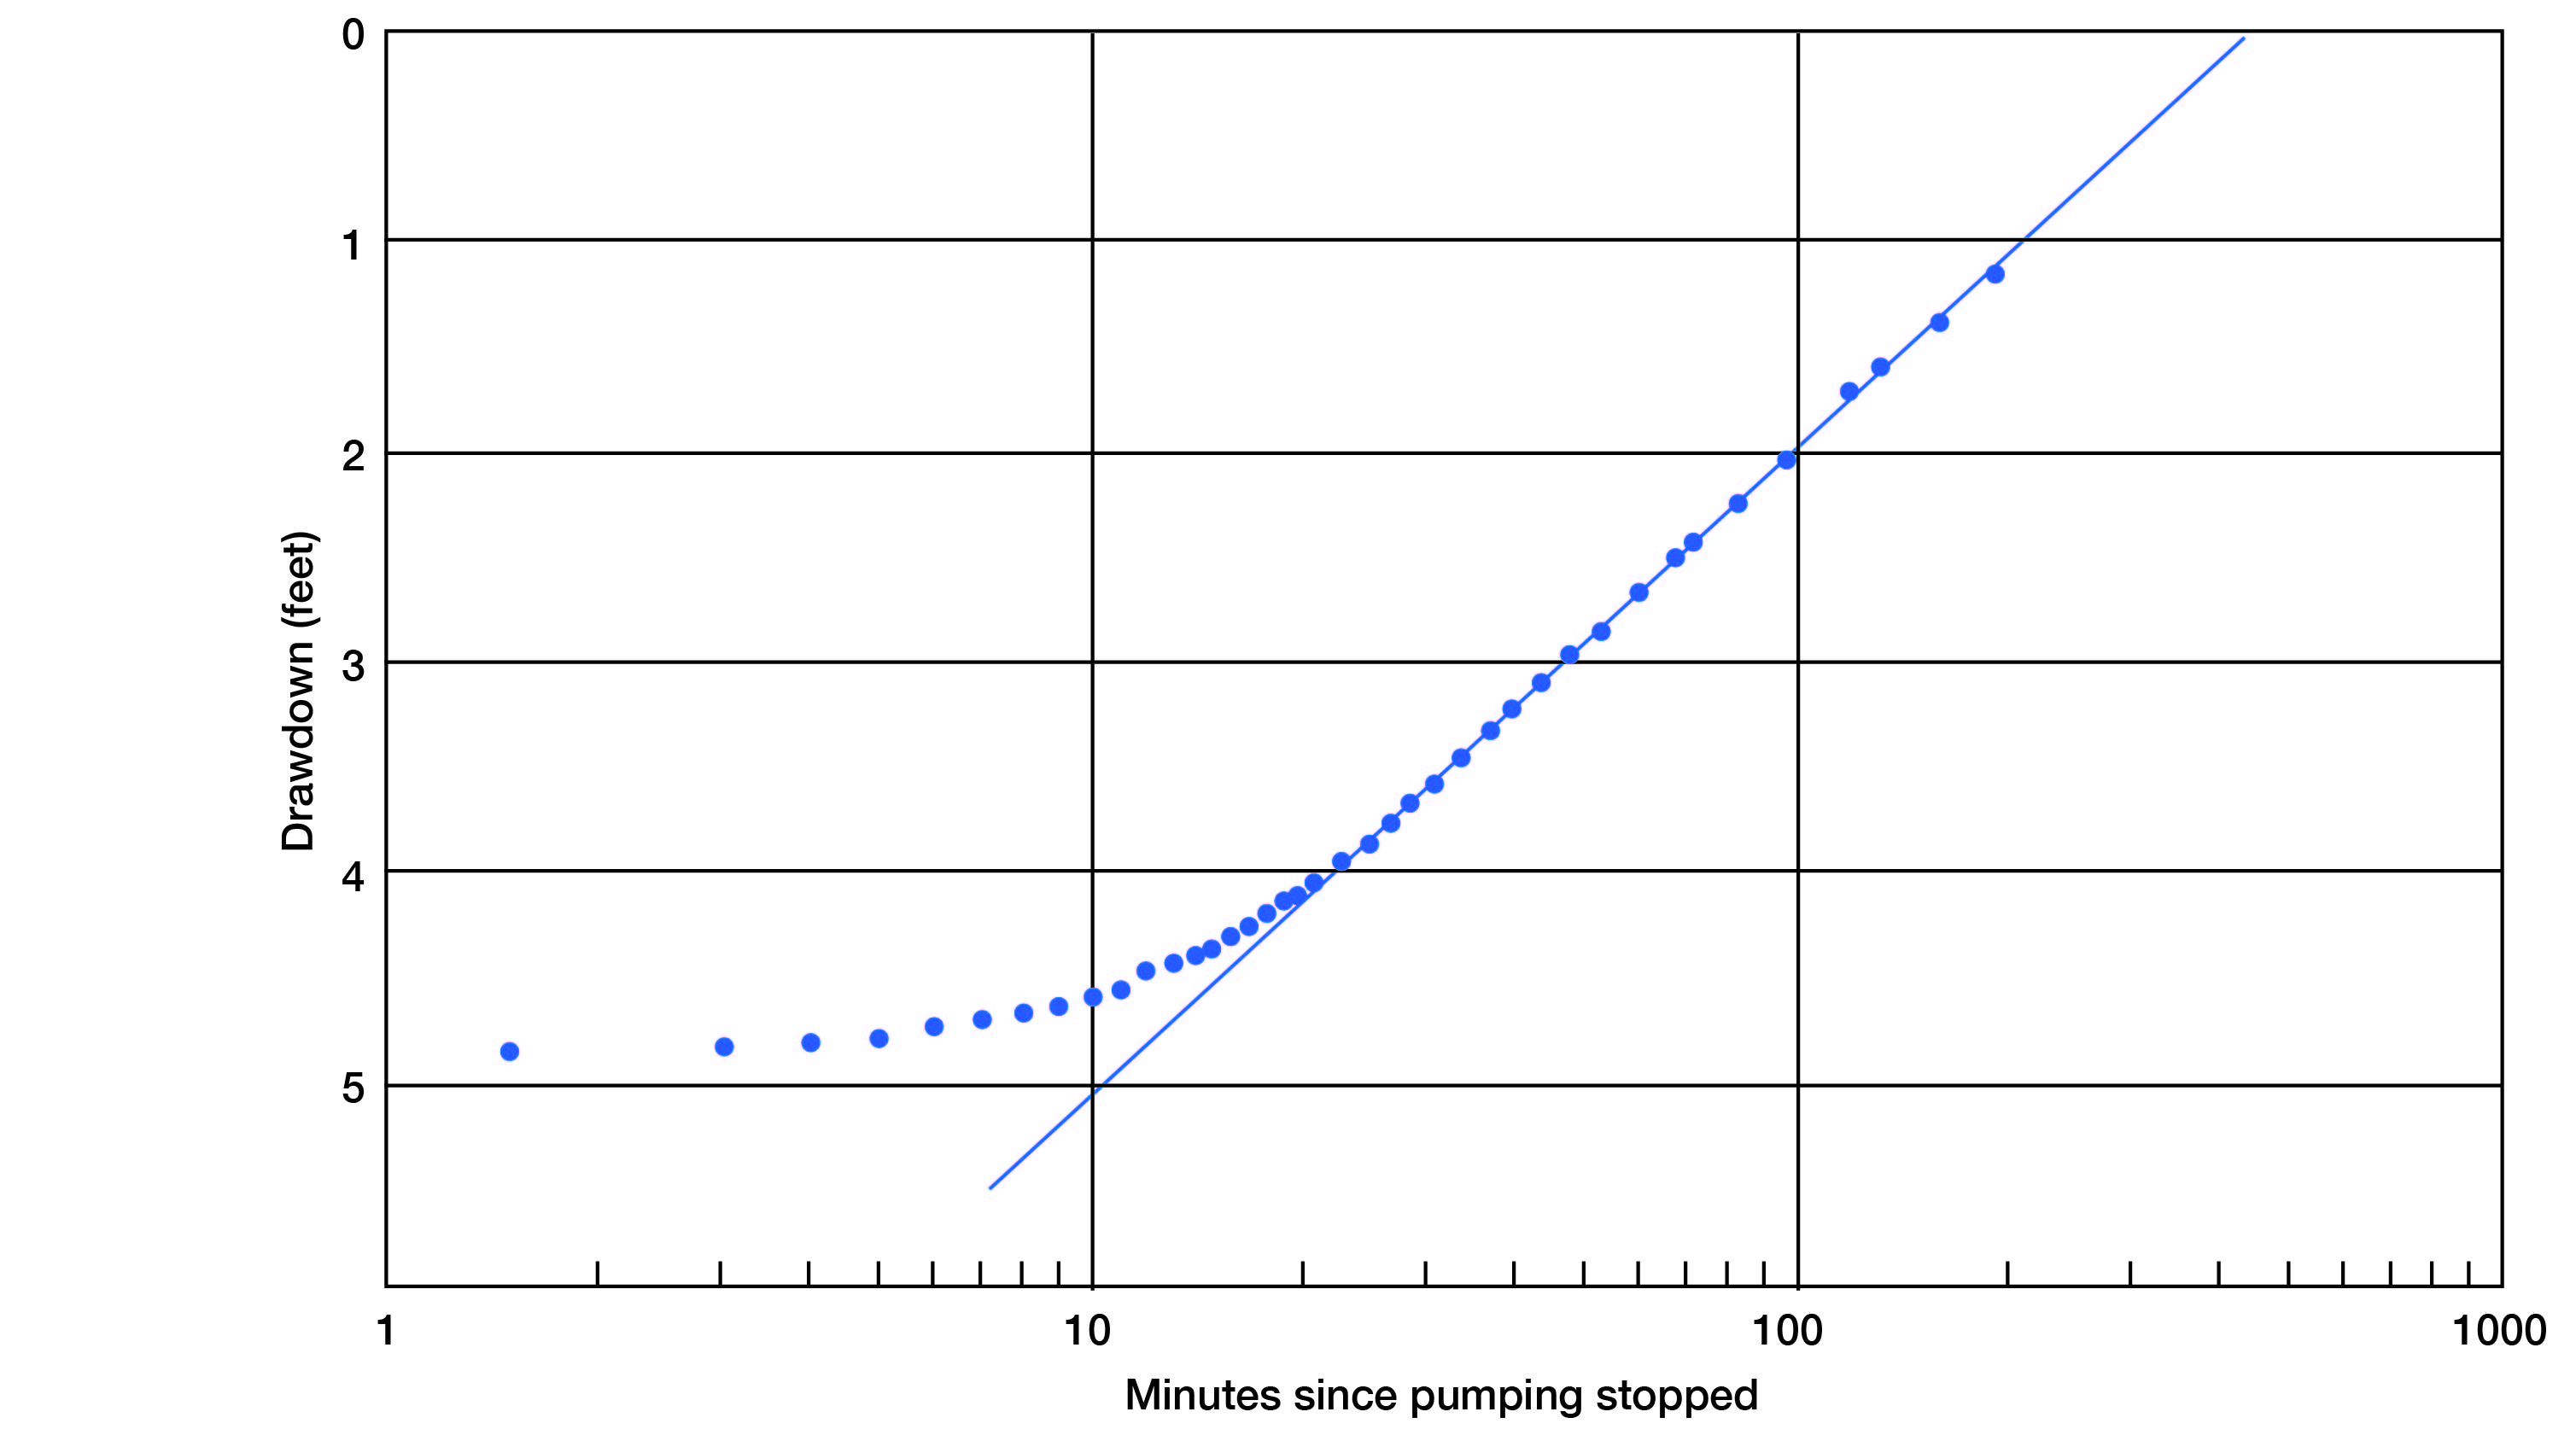 Recovery curve plotted against log(time) straightens after 11-12 minutes; no drawdown curve.